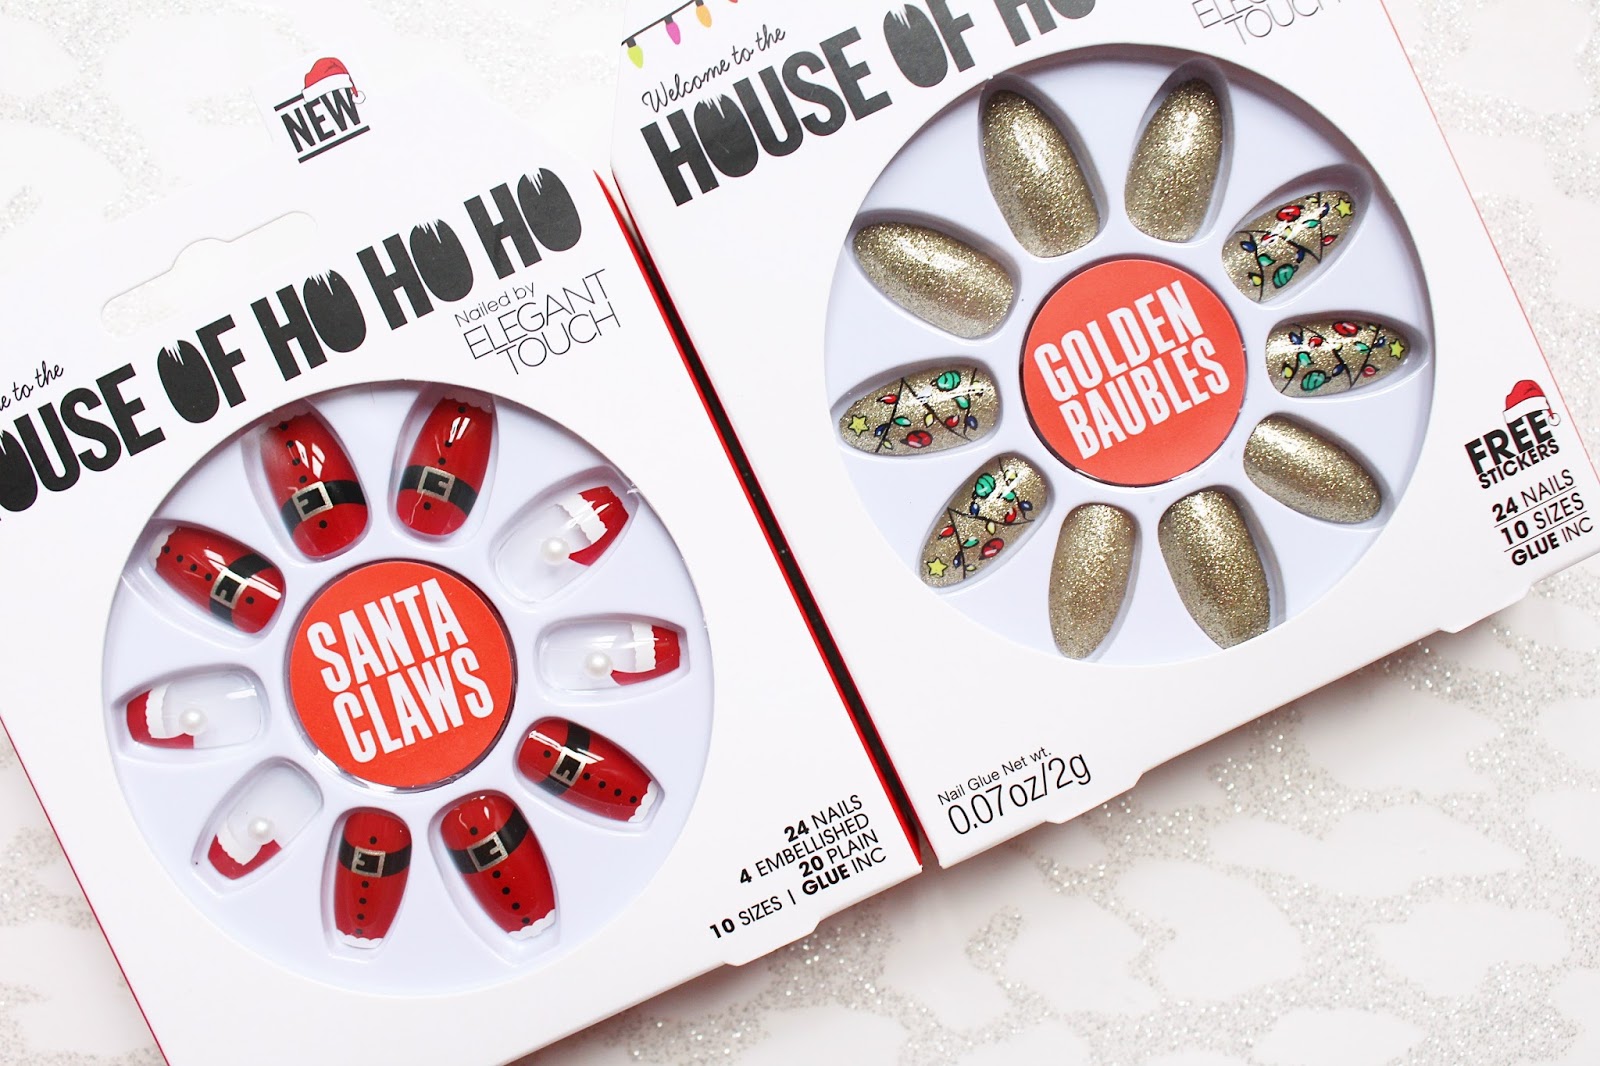 Elegant Touch x House of Holland Christmas Nails 